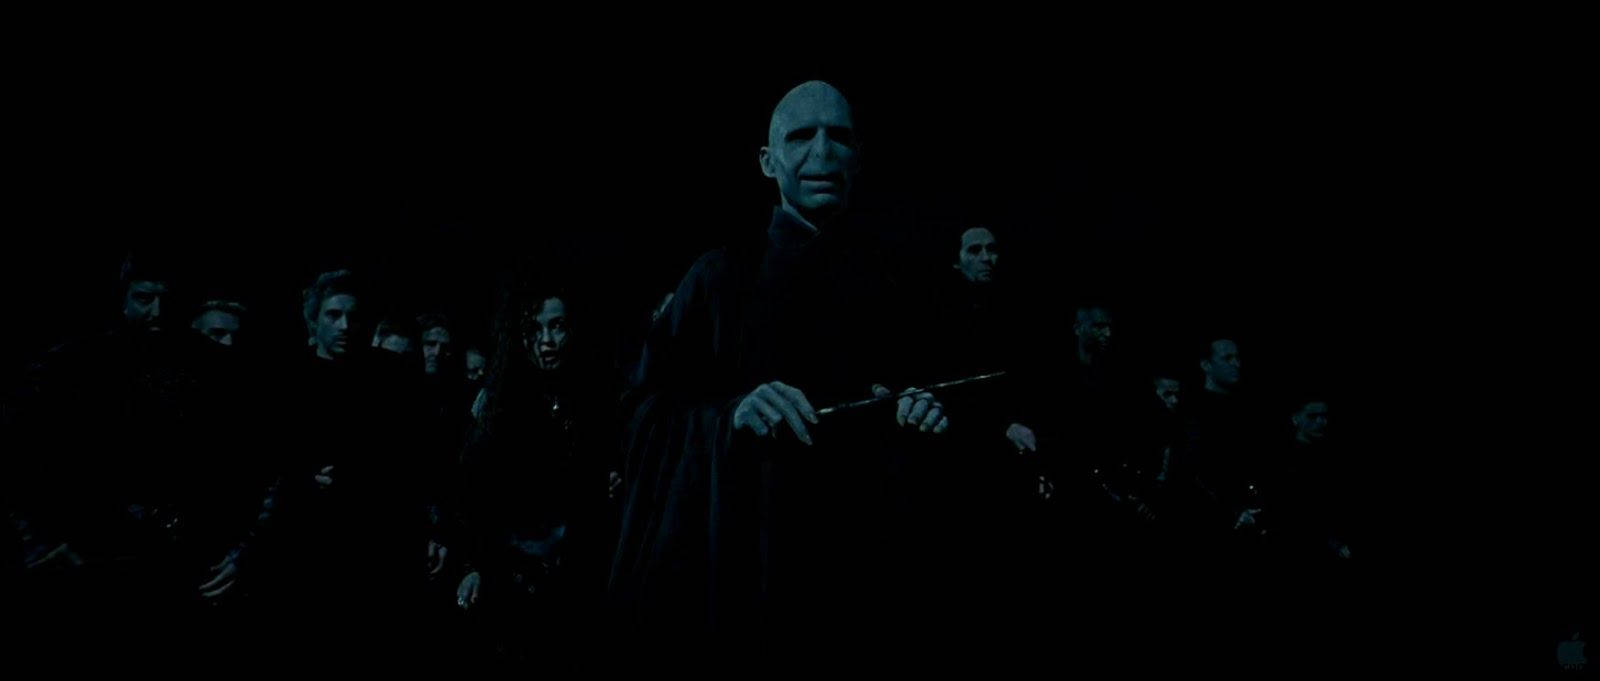 Lord Voldemort Evil Wizards Background